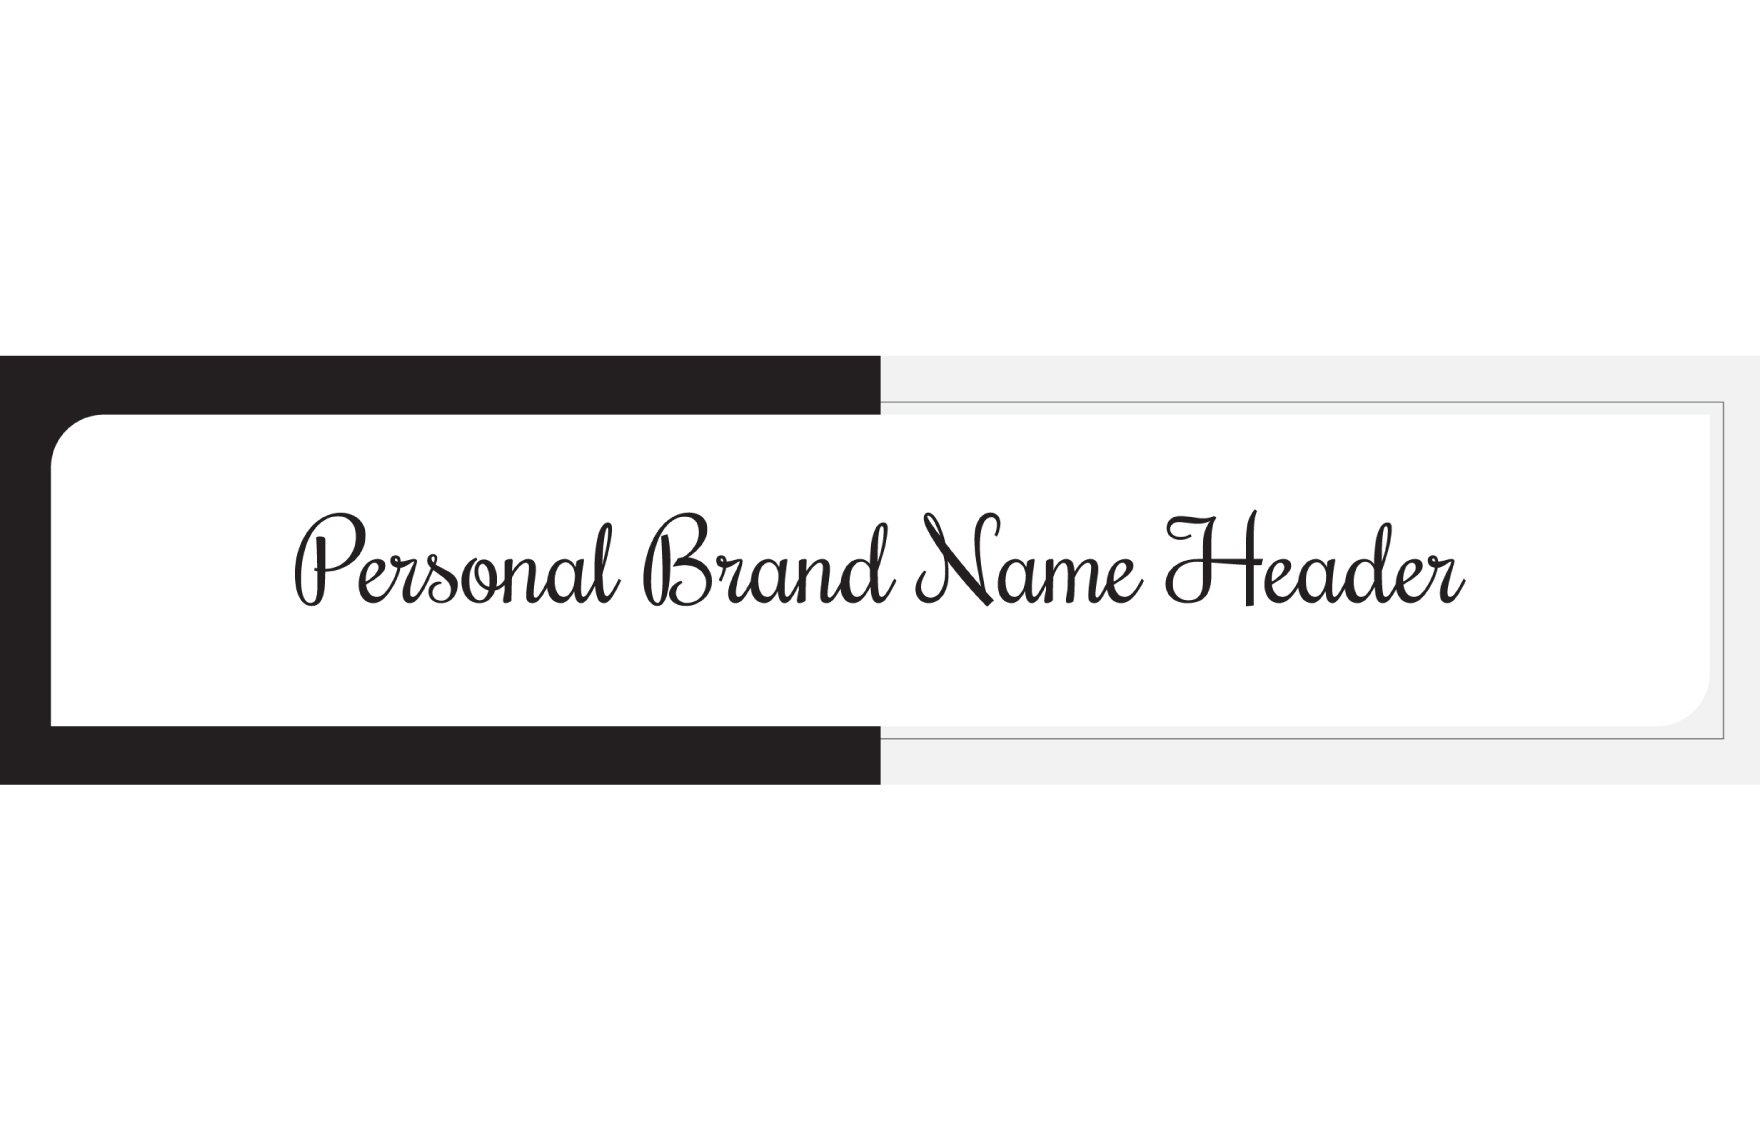 Personal Brand Name Header Template